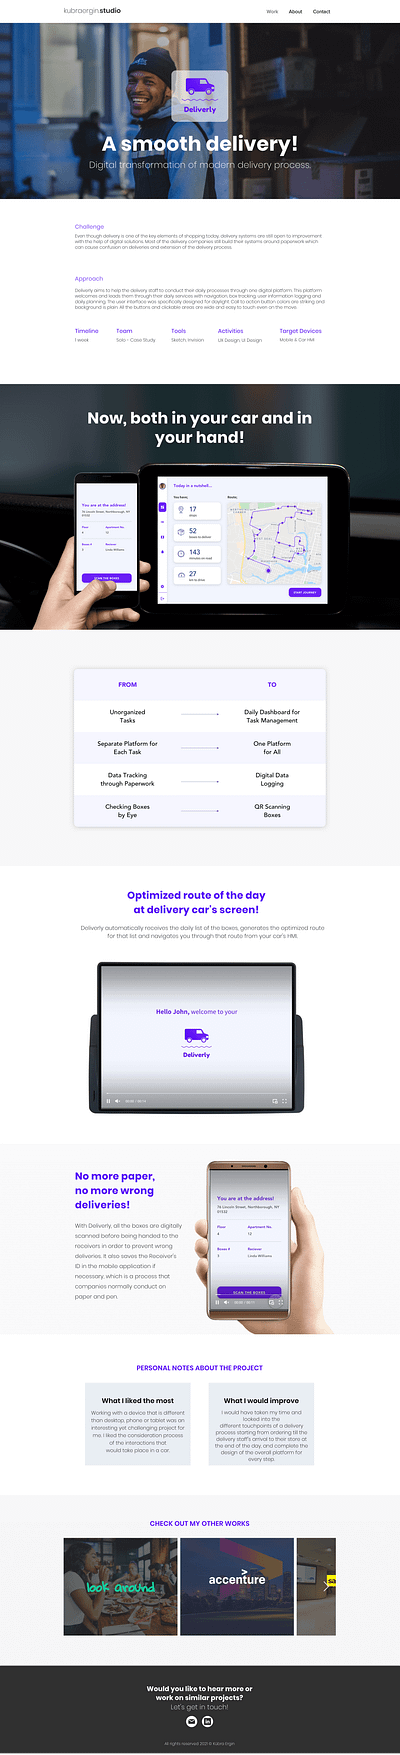 Deliverly - A Smooth Delivery app branding design ui ux